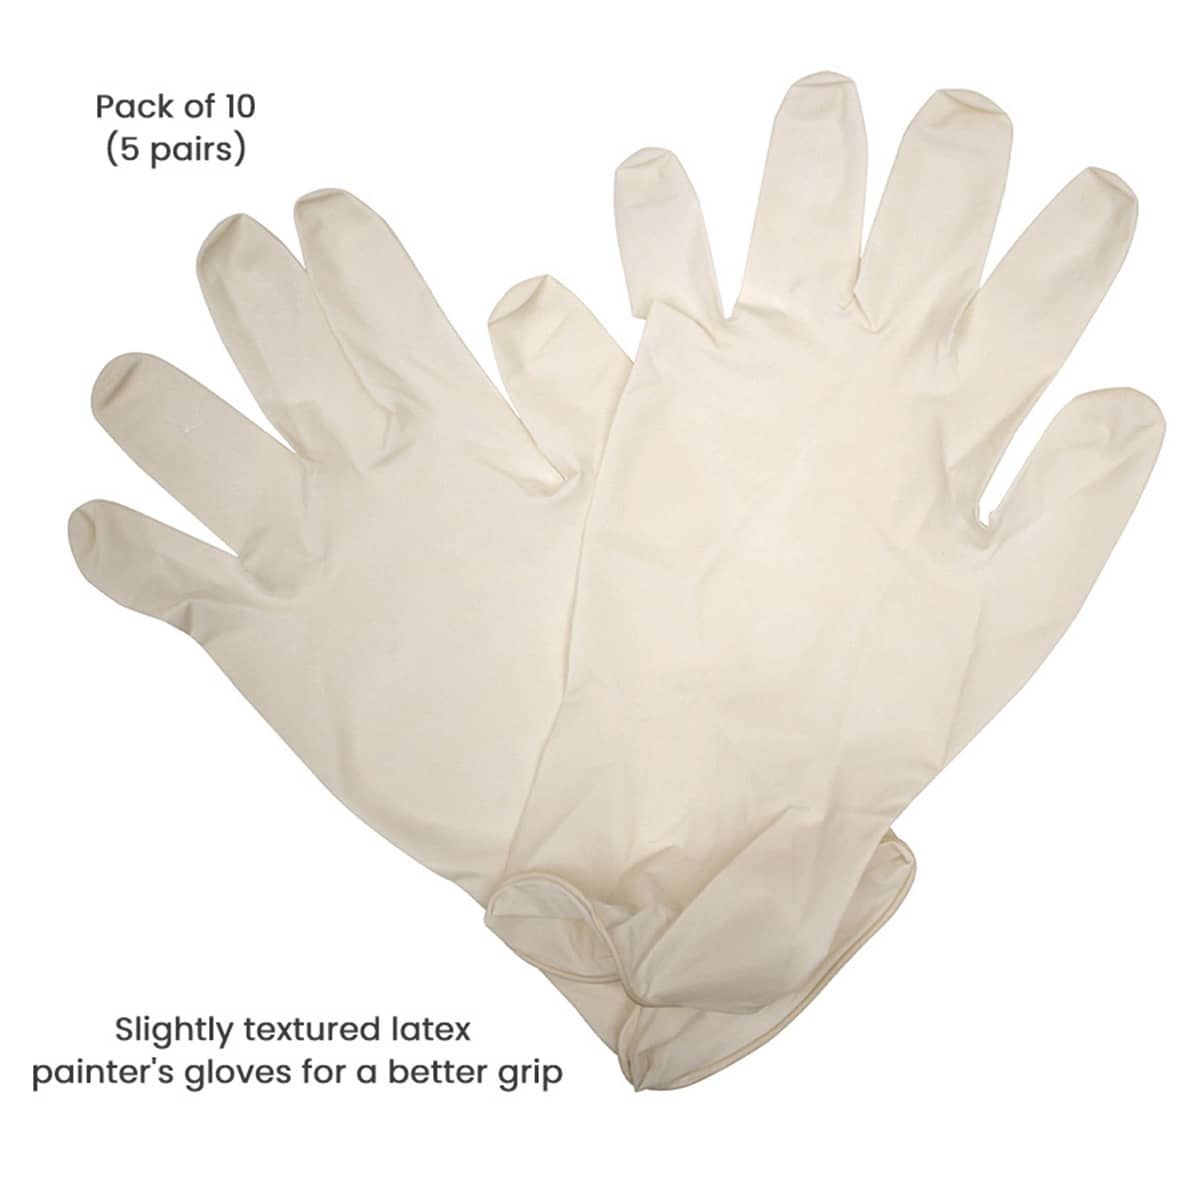 Slightly textured latex painter's gloves for a better grip